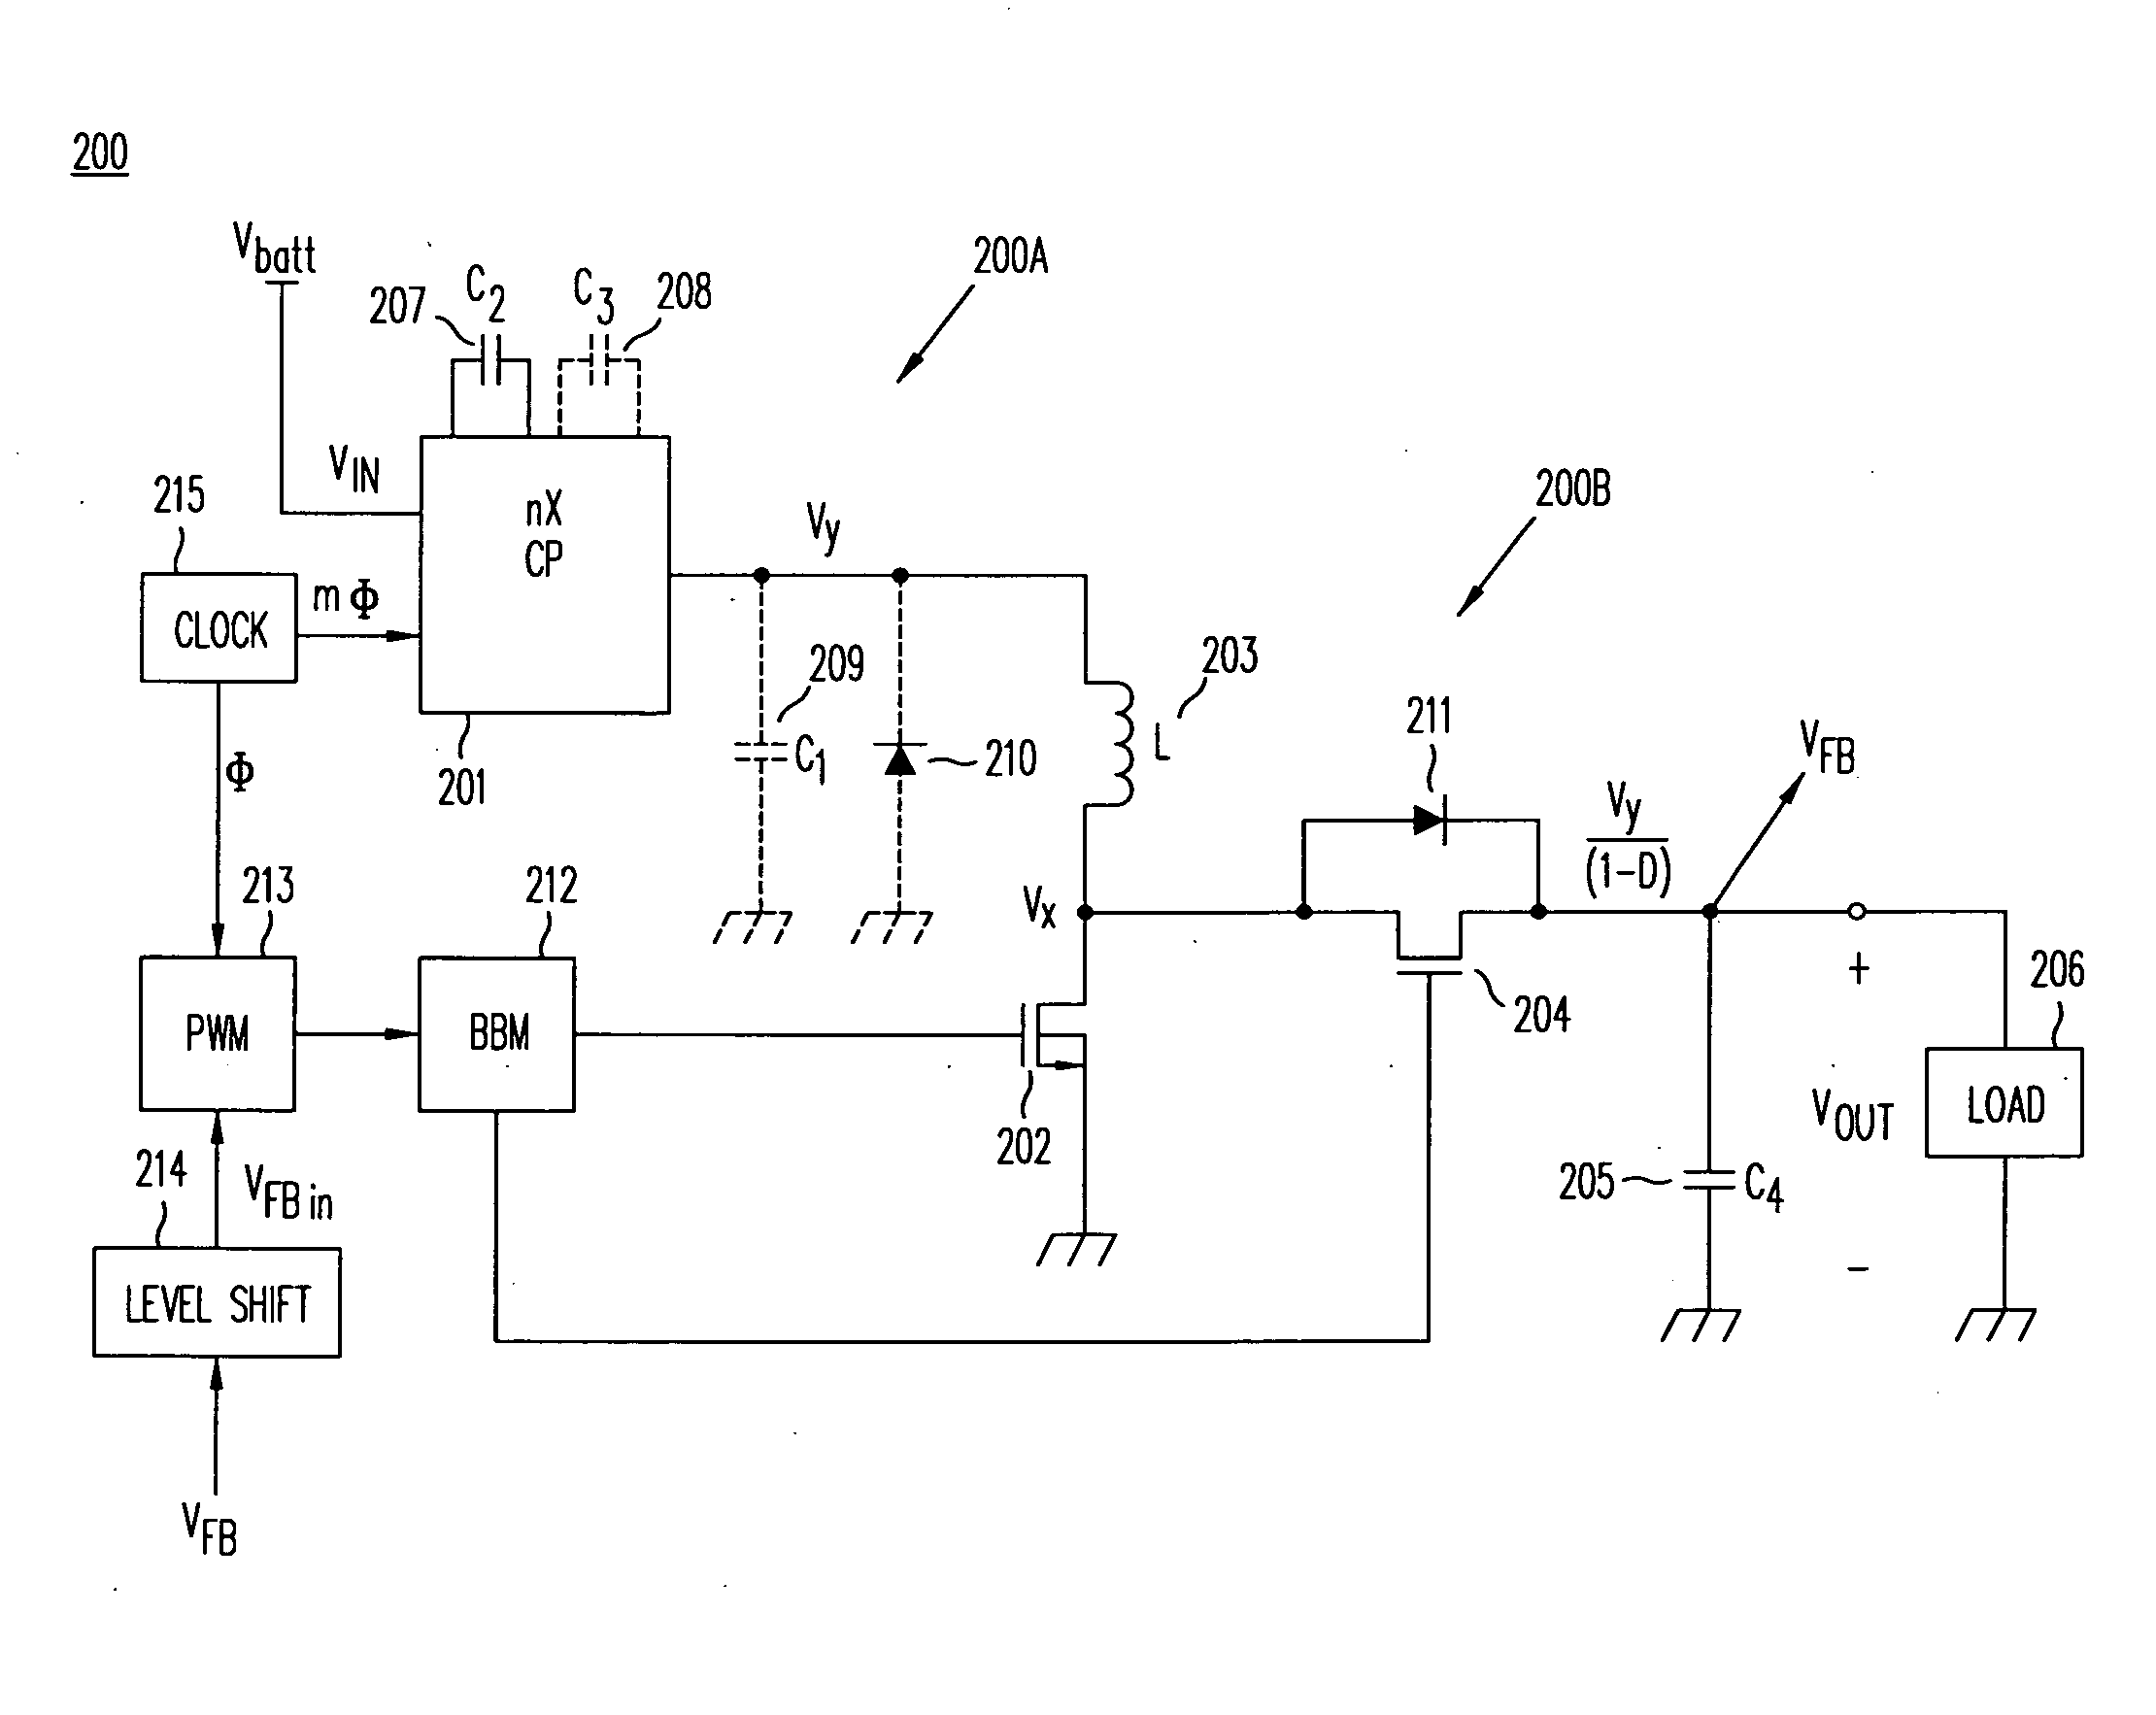 High-efficiency DC/DC voltage converter including capacitive switching pre-converter and up inductive switching post-regulator